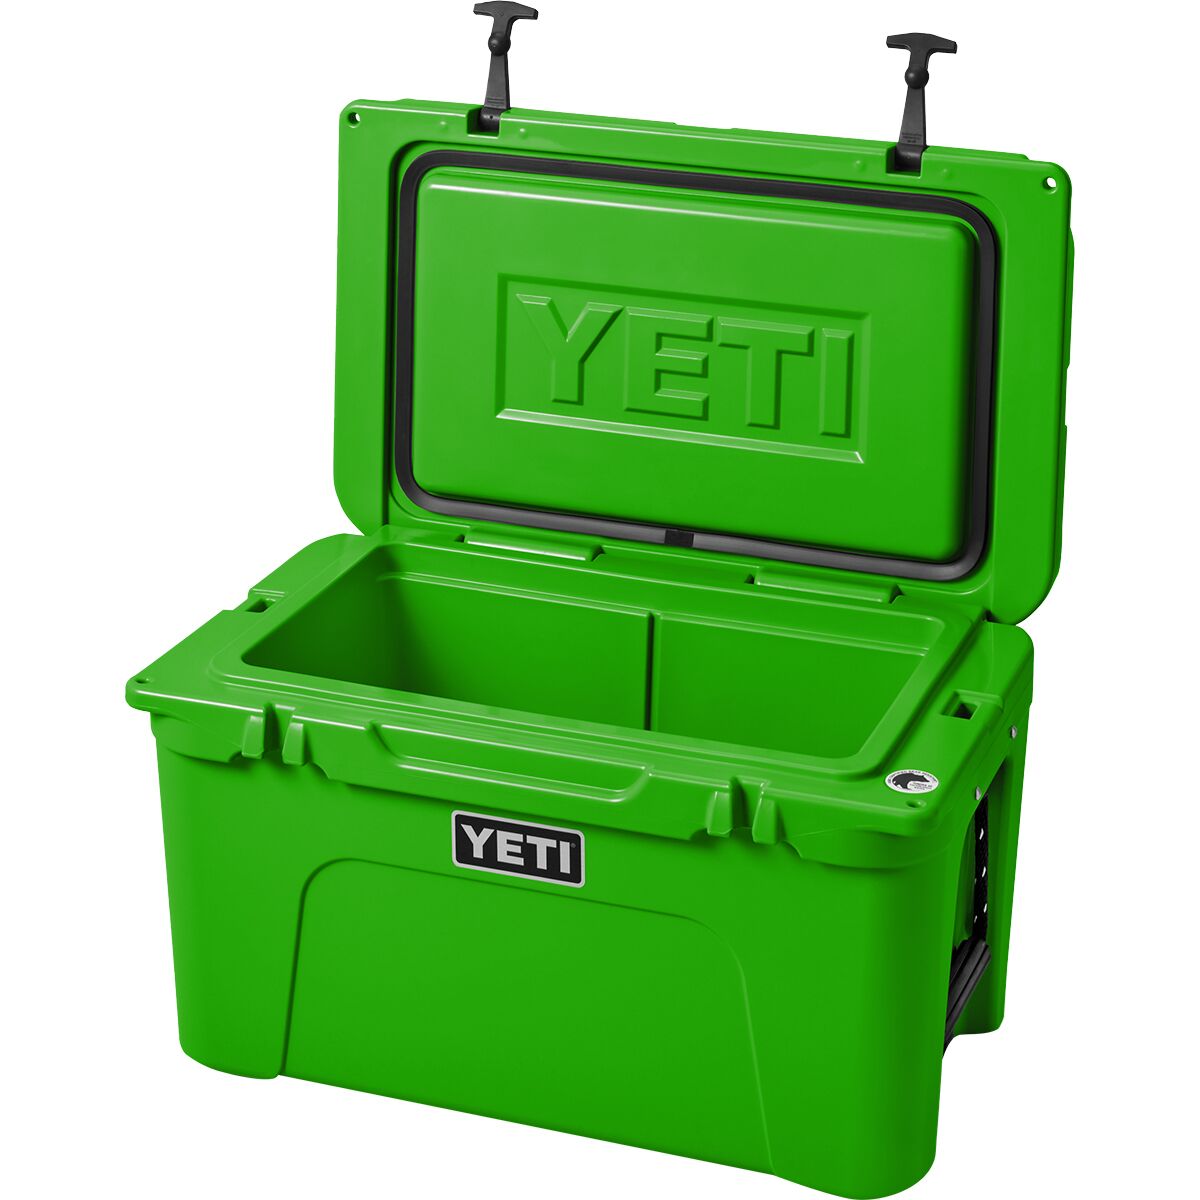 YETI Tundra 45 Insulated Chest Cooler, Navy at